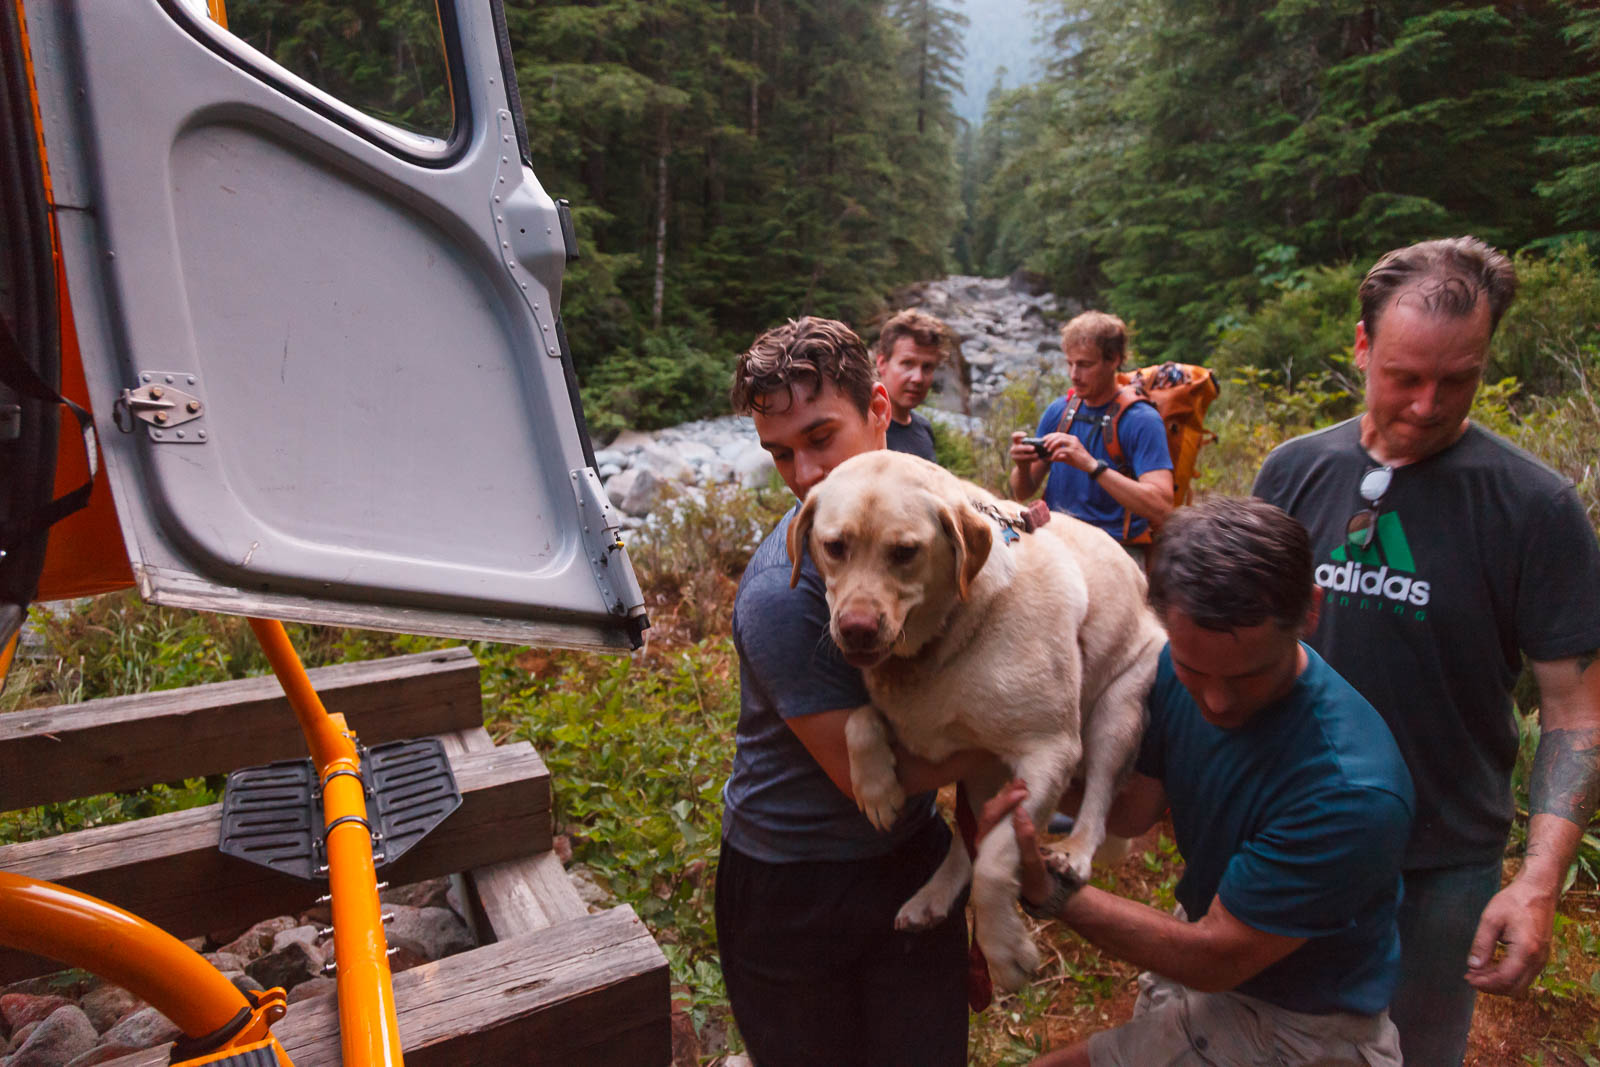 Exhausted dog needs a little help from North Shore Rescue - image